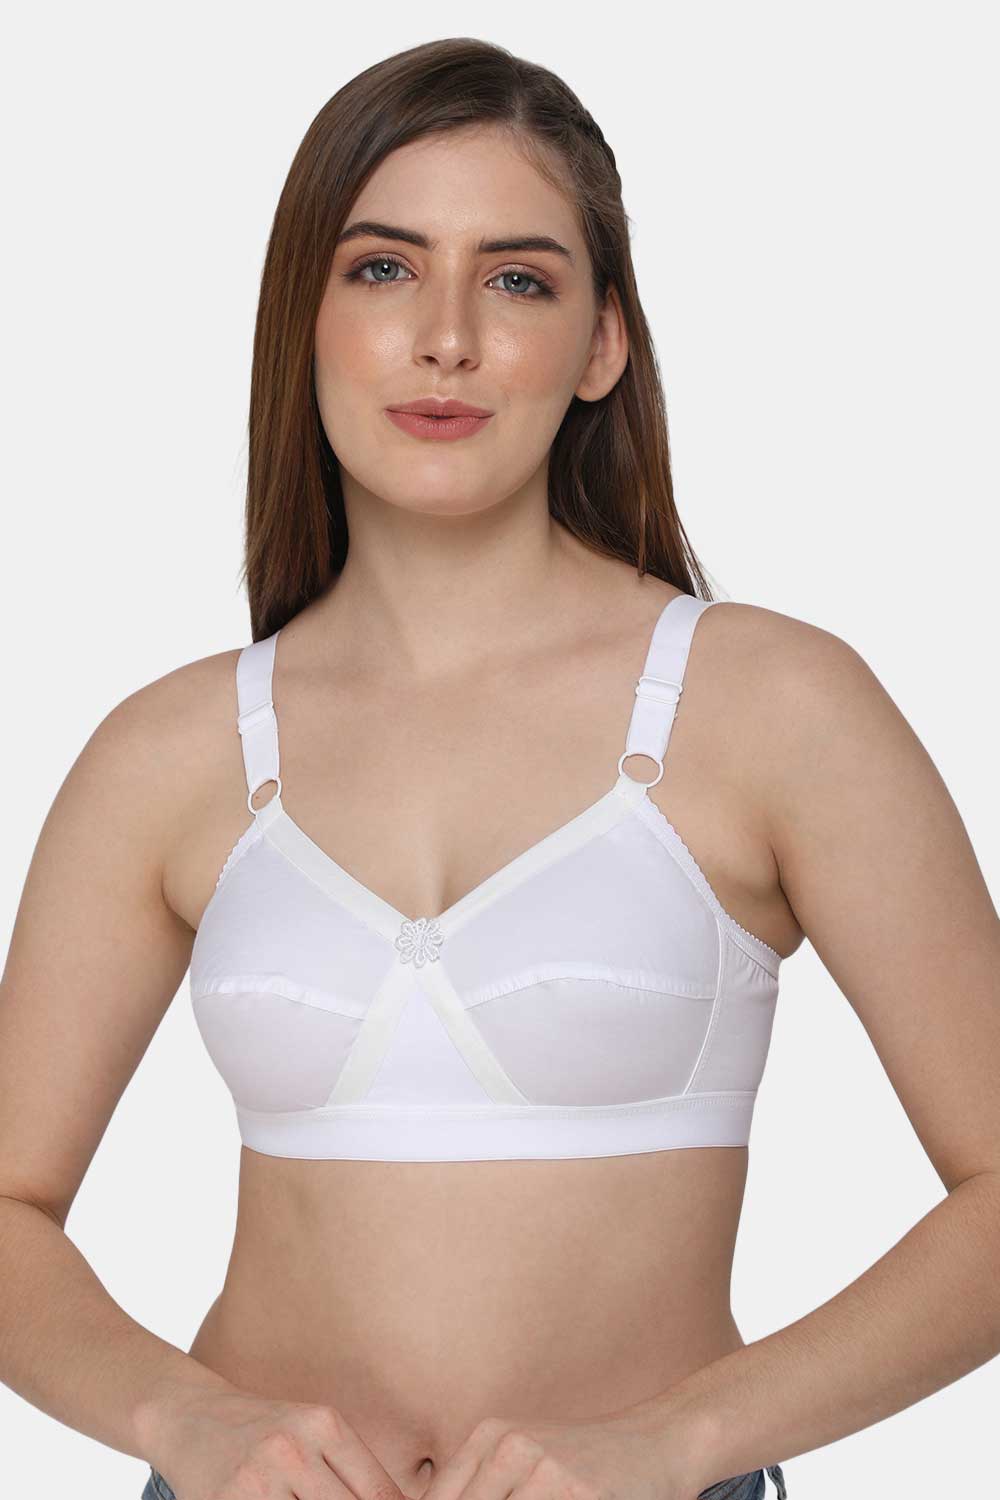 Buy INTIMACY LINGERIE Bra for Women, Non-Padded, Non-Wired, Seamless and  Front Open Bra for Women, Moderate Coverage, Molded Cups and Plunge  Neckline